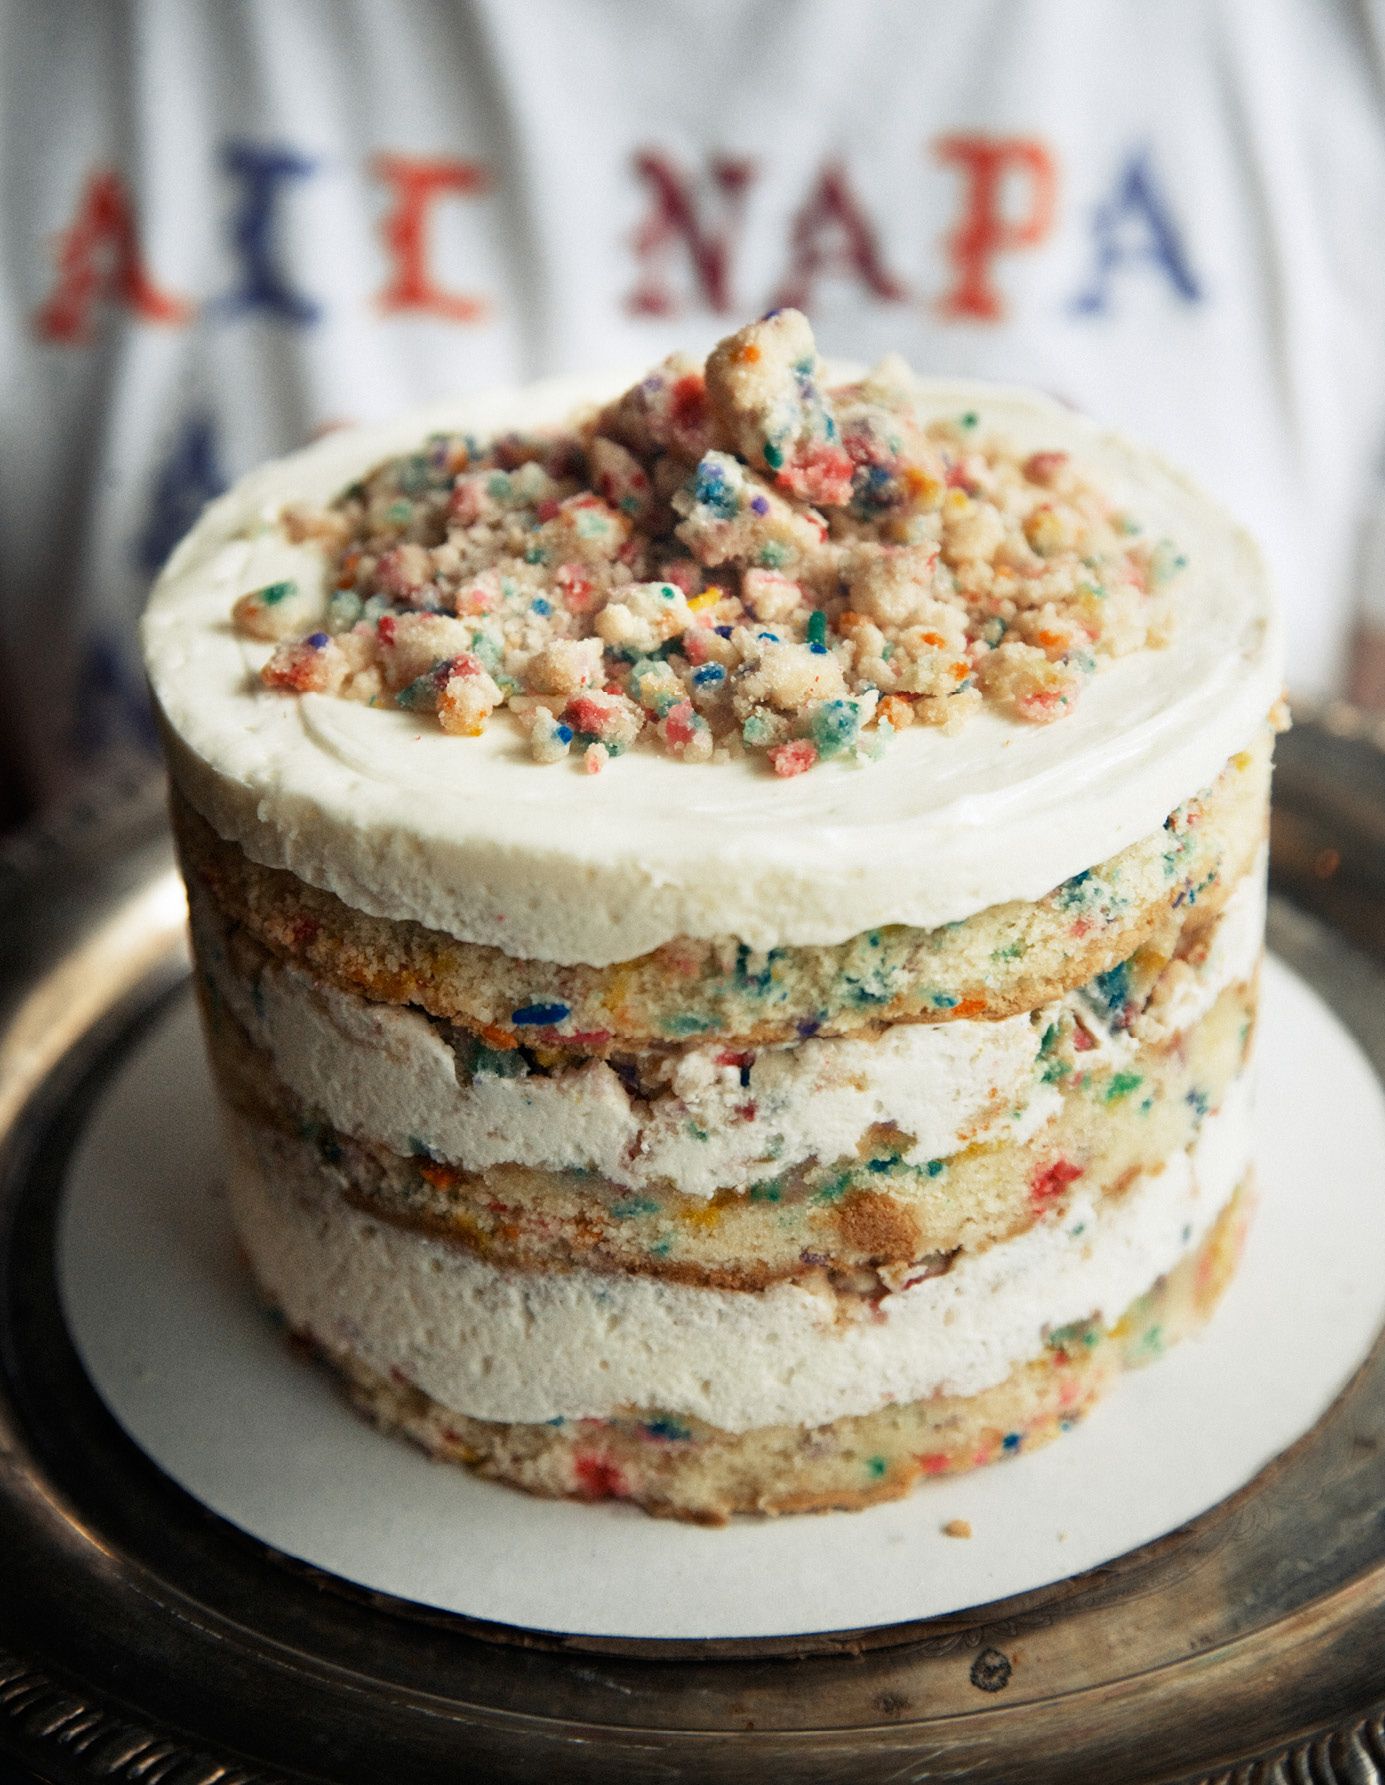 10+ EPIC NYC BIRTHDAY Cakes: No Party FOULS Here, Folks